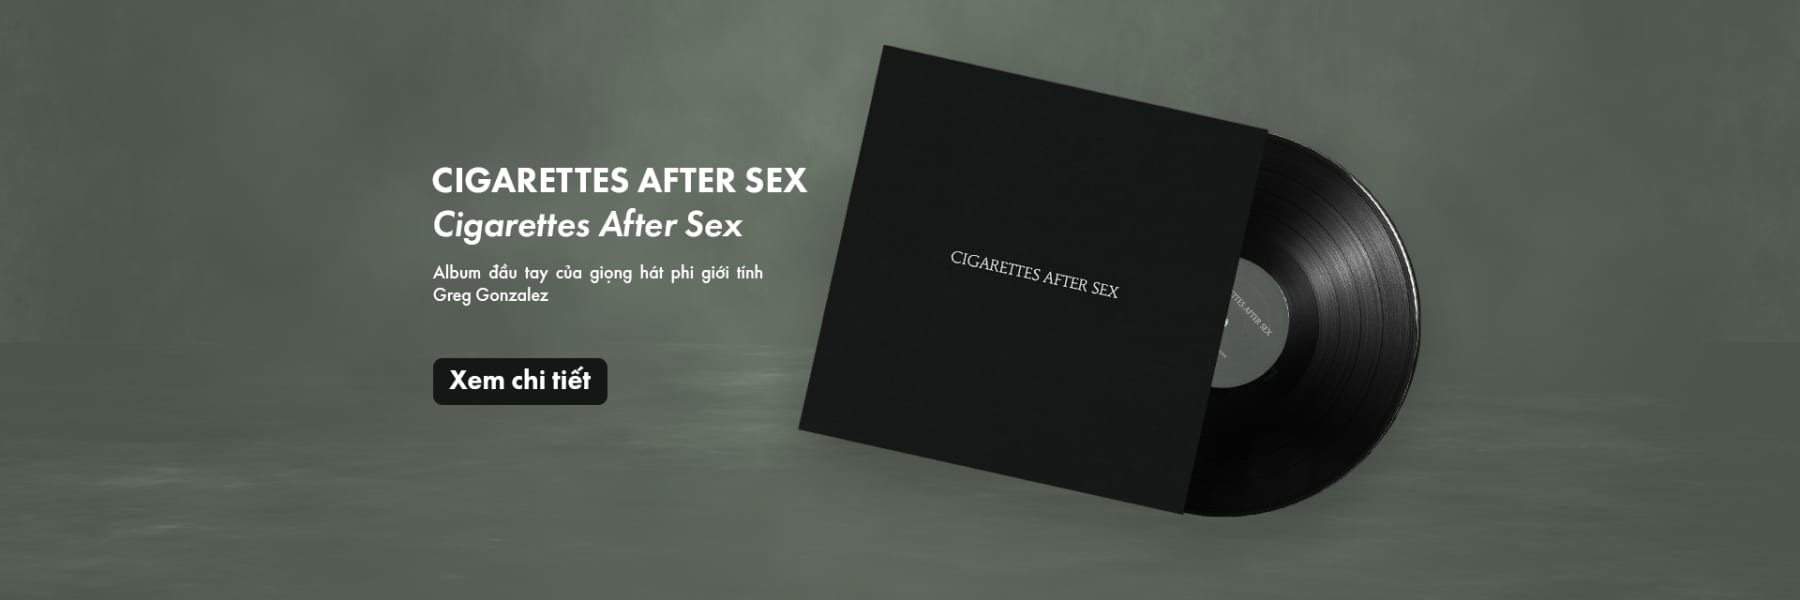 https://vocrecords.vn/product/cigarettes-after-sex-cigarettes-after-sex/